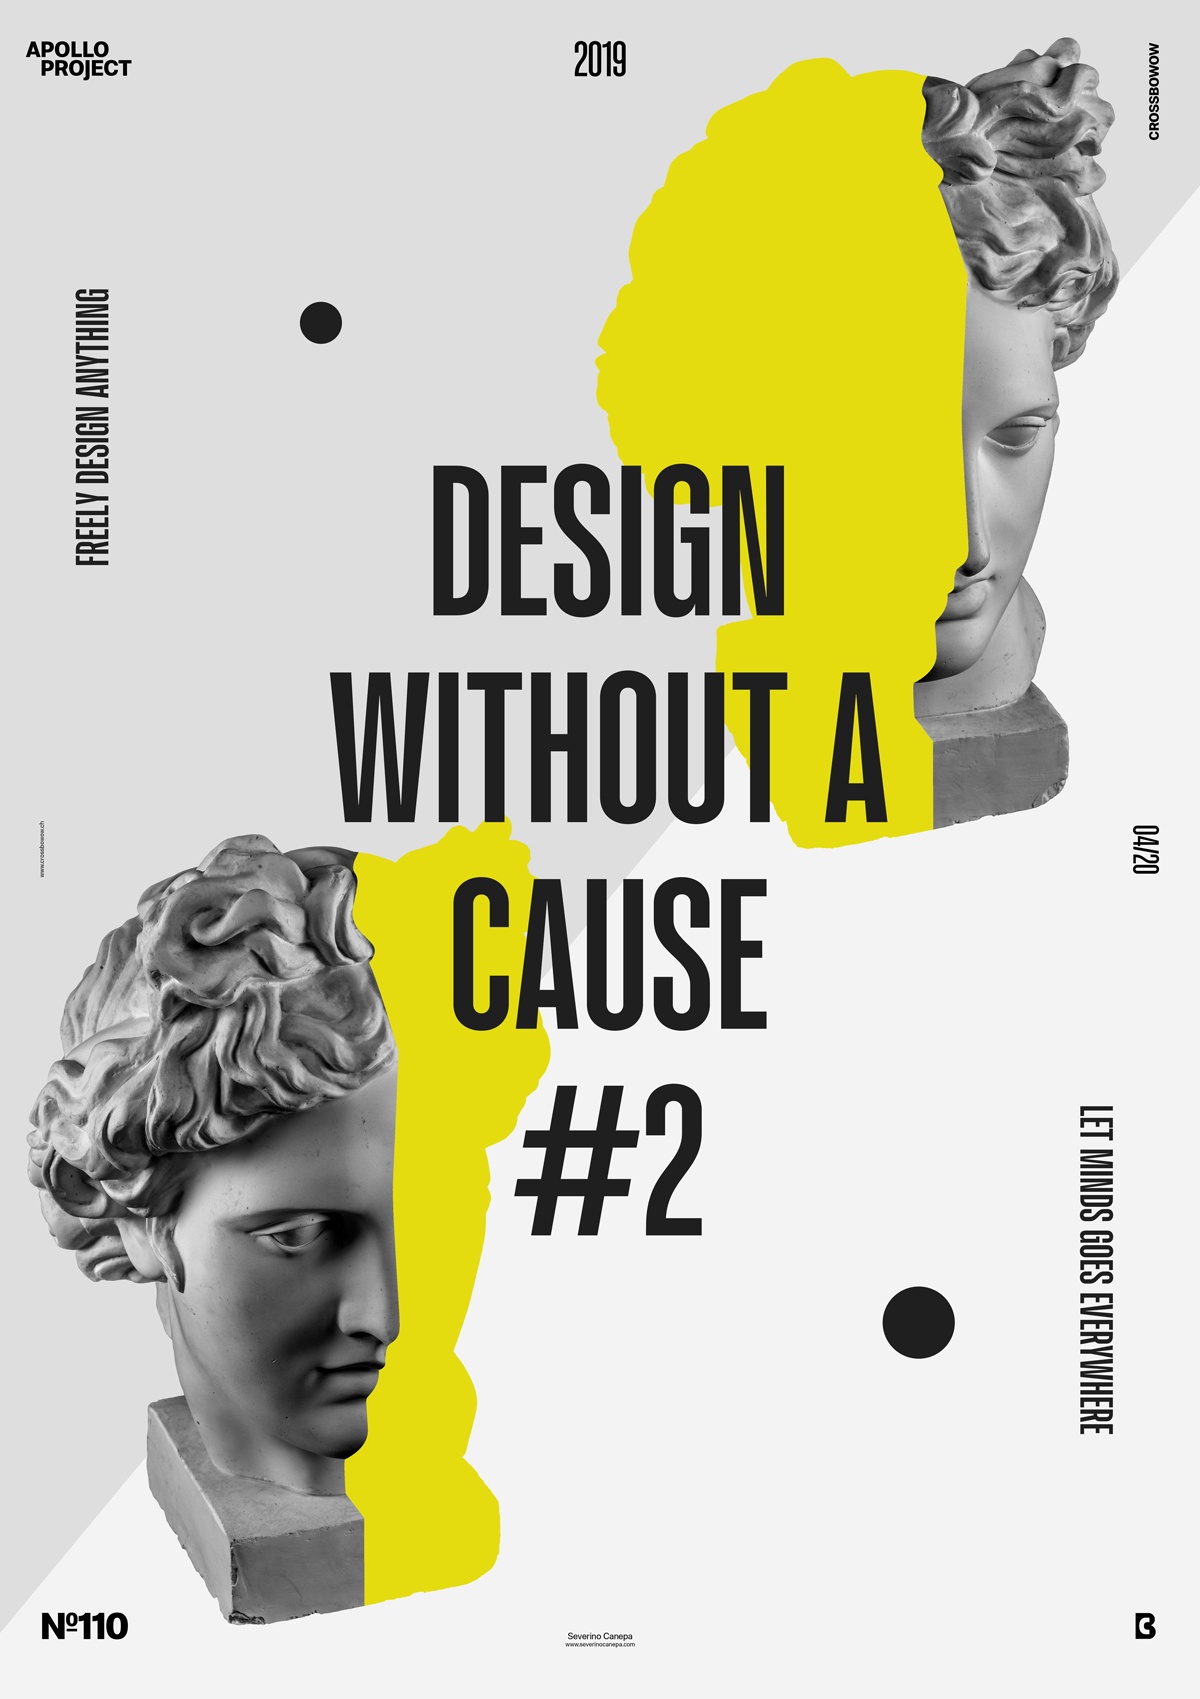 Minimalist poster design #110 from the mini series Design Without a Cause #2